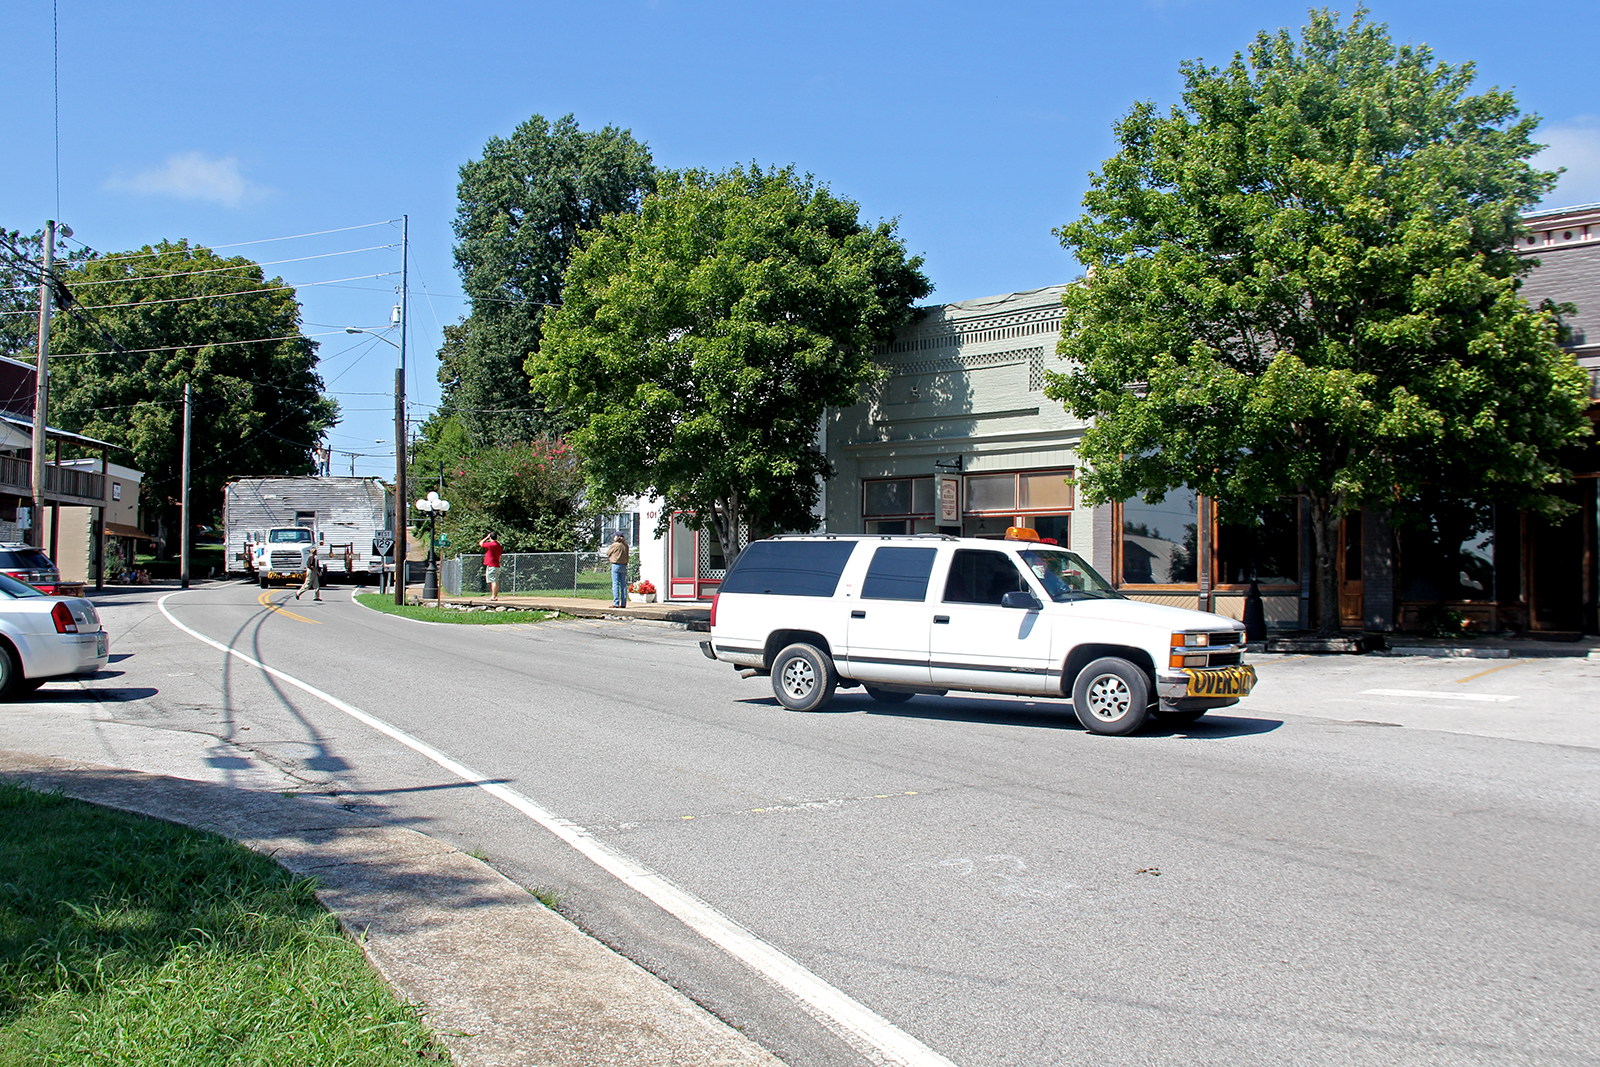 White SUV with oversized load warning driving down main street in Lynnville, TN and a truck pulling a trailer loader with the one-room school house headed for Colonel's farm